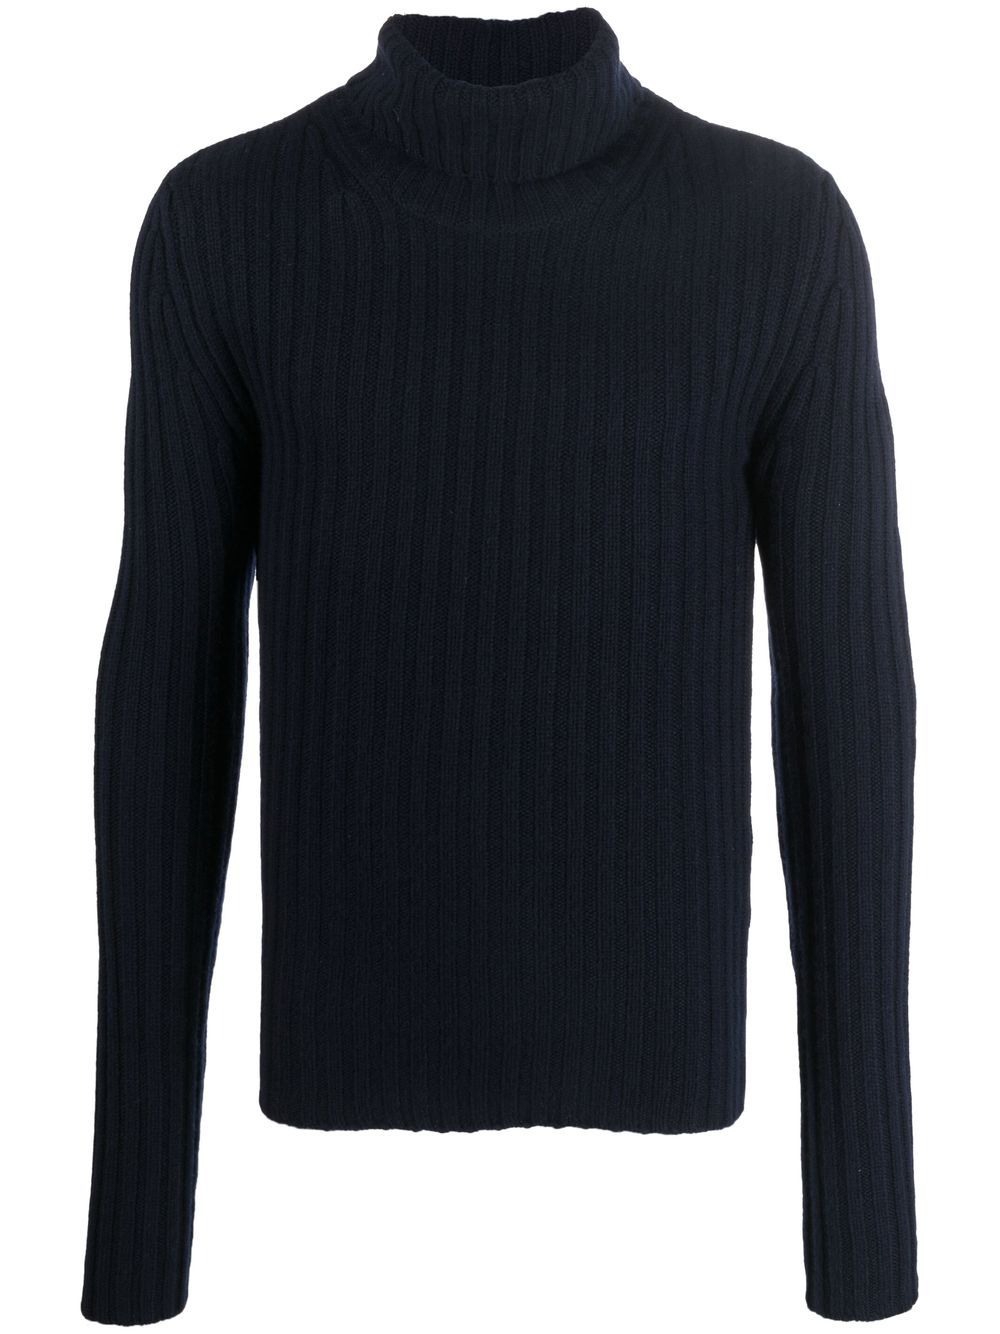 Jacob Lee Ribbed Cashmere Jumper - Farfetch